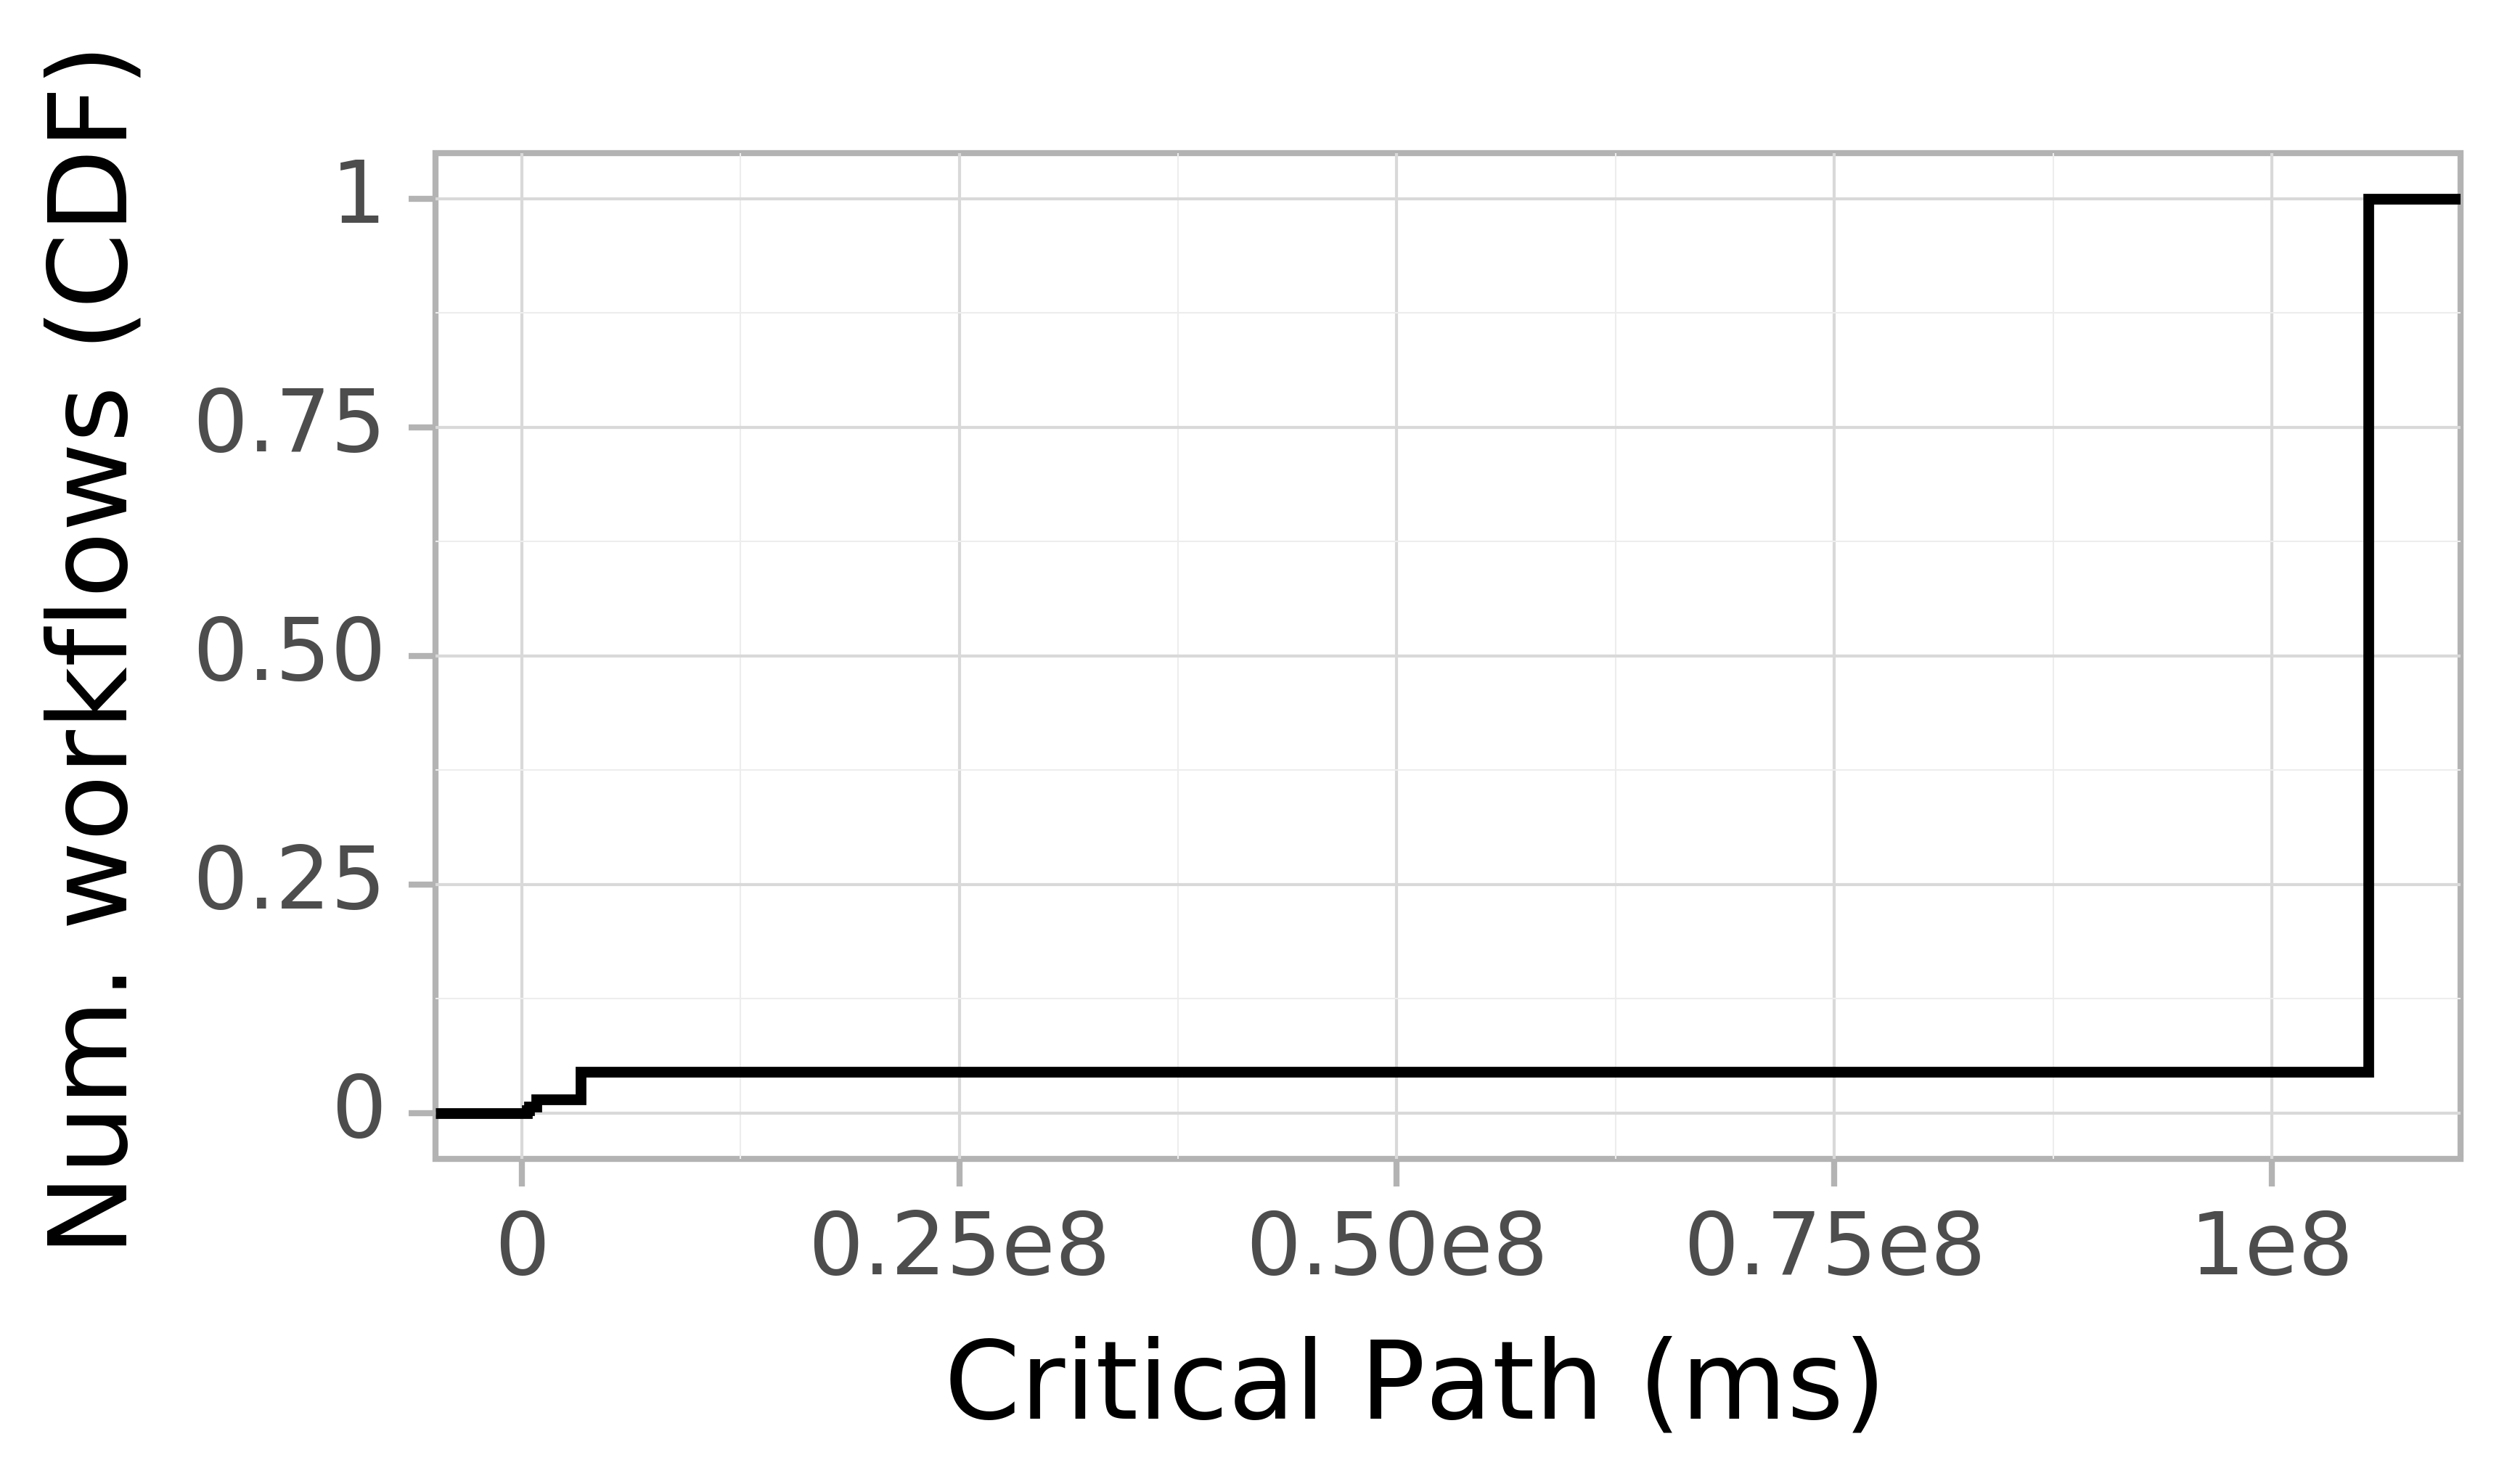 Job runtime CDF graph for the Pegasus_P2 trace.